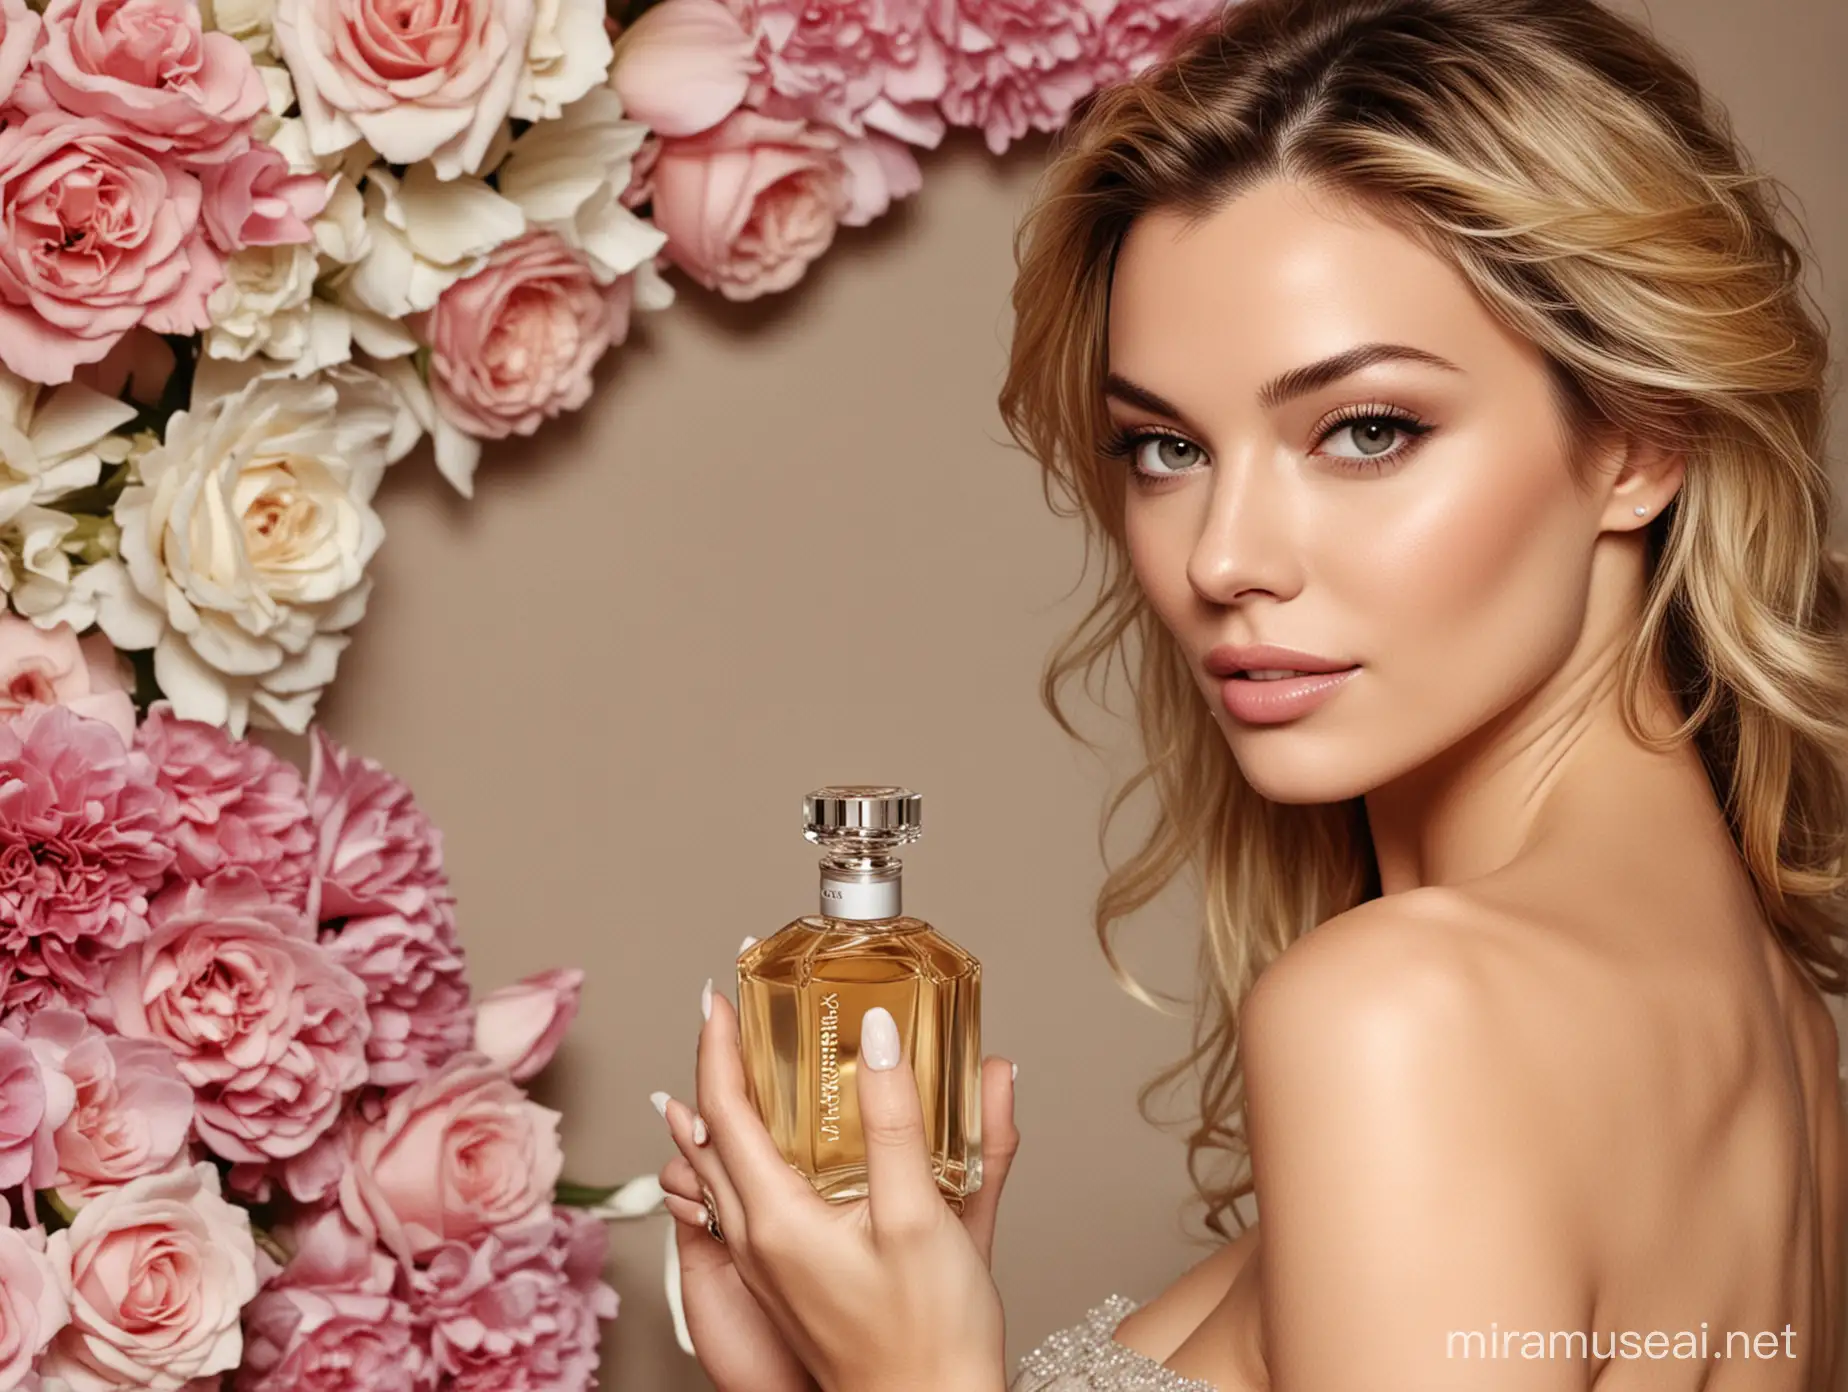 Celebrity Endorsement Boost Influencing Natural Perfume Trends